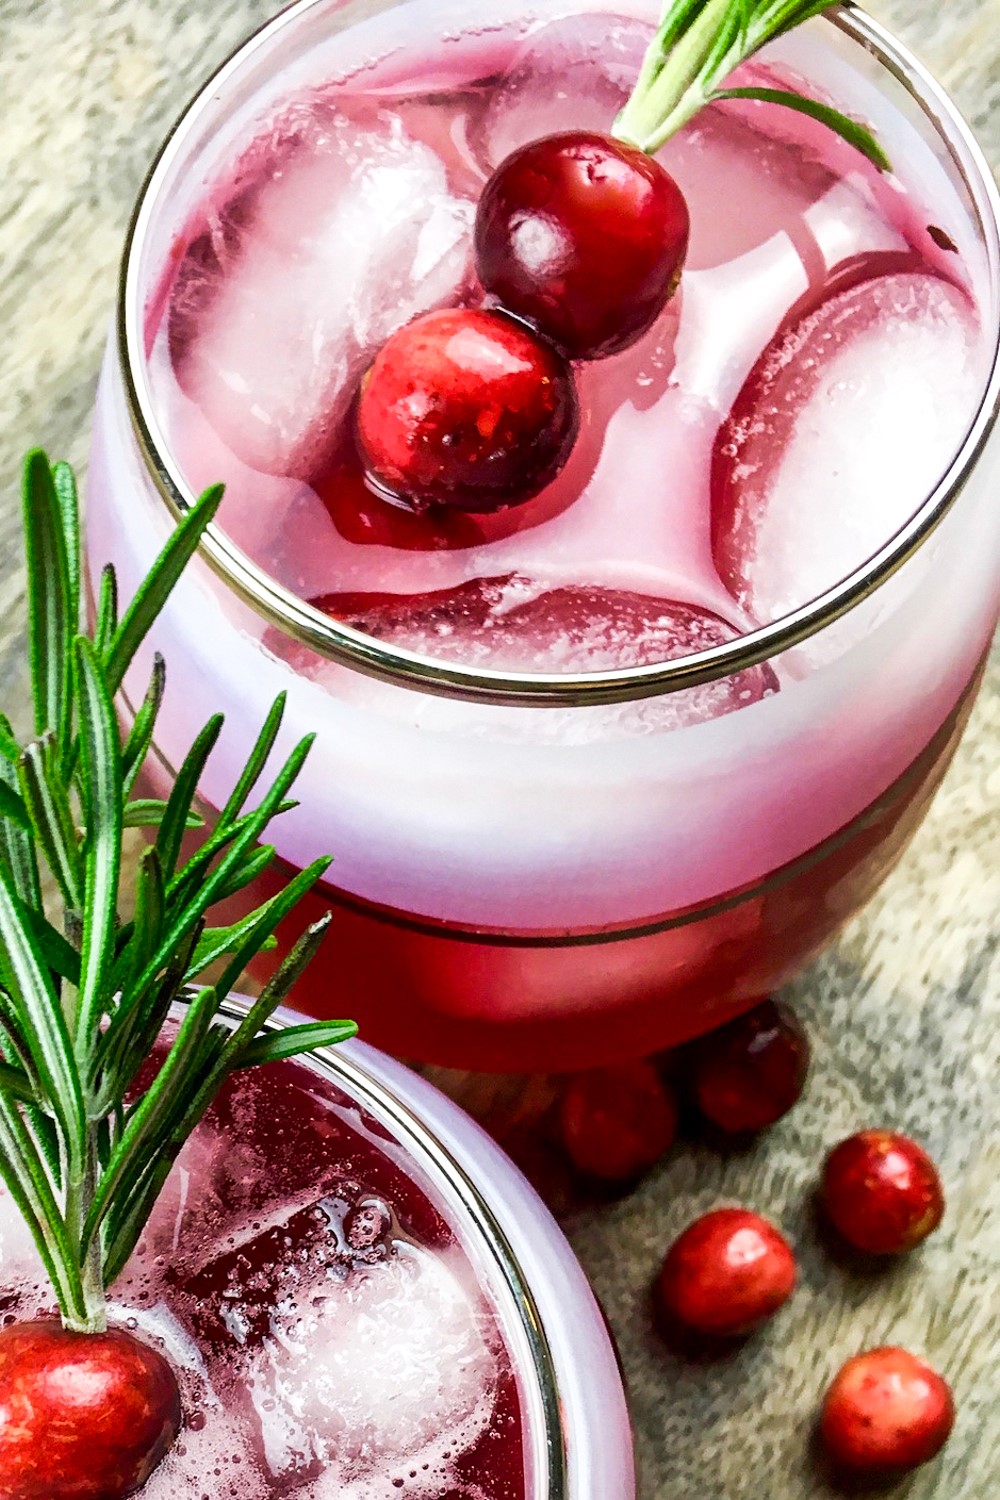 Spiced Cranberry Spritzer is a festive drink with cranberry, orange, and cinnamon. Add vodka for an adults-only treat, or omit for a mocktail.